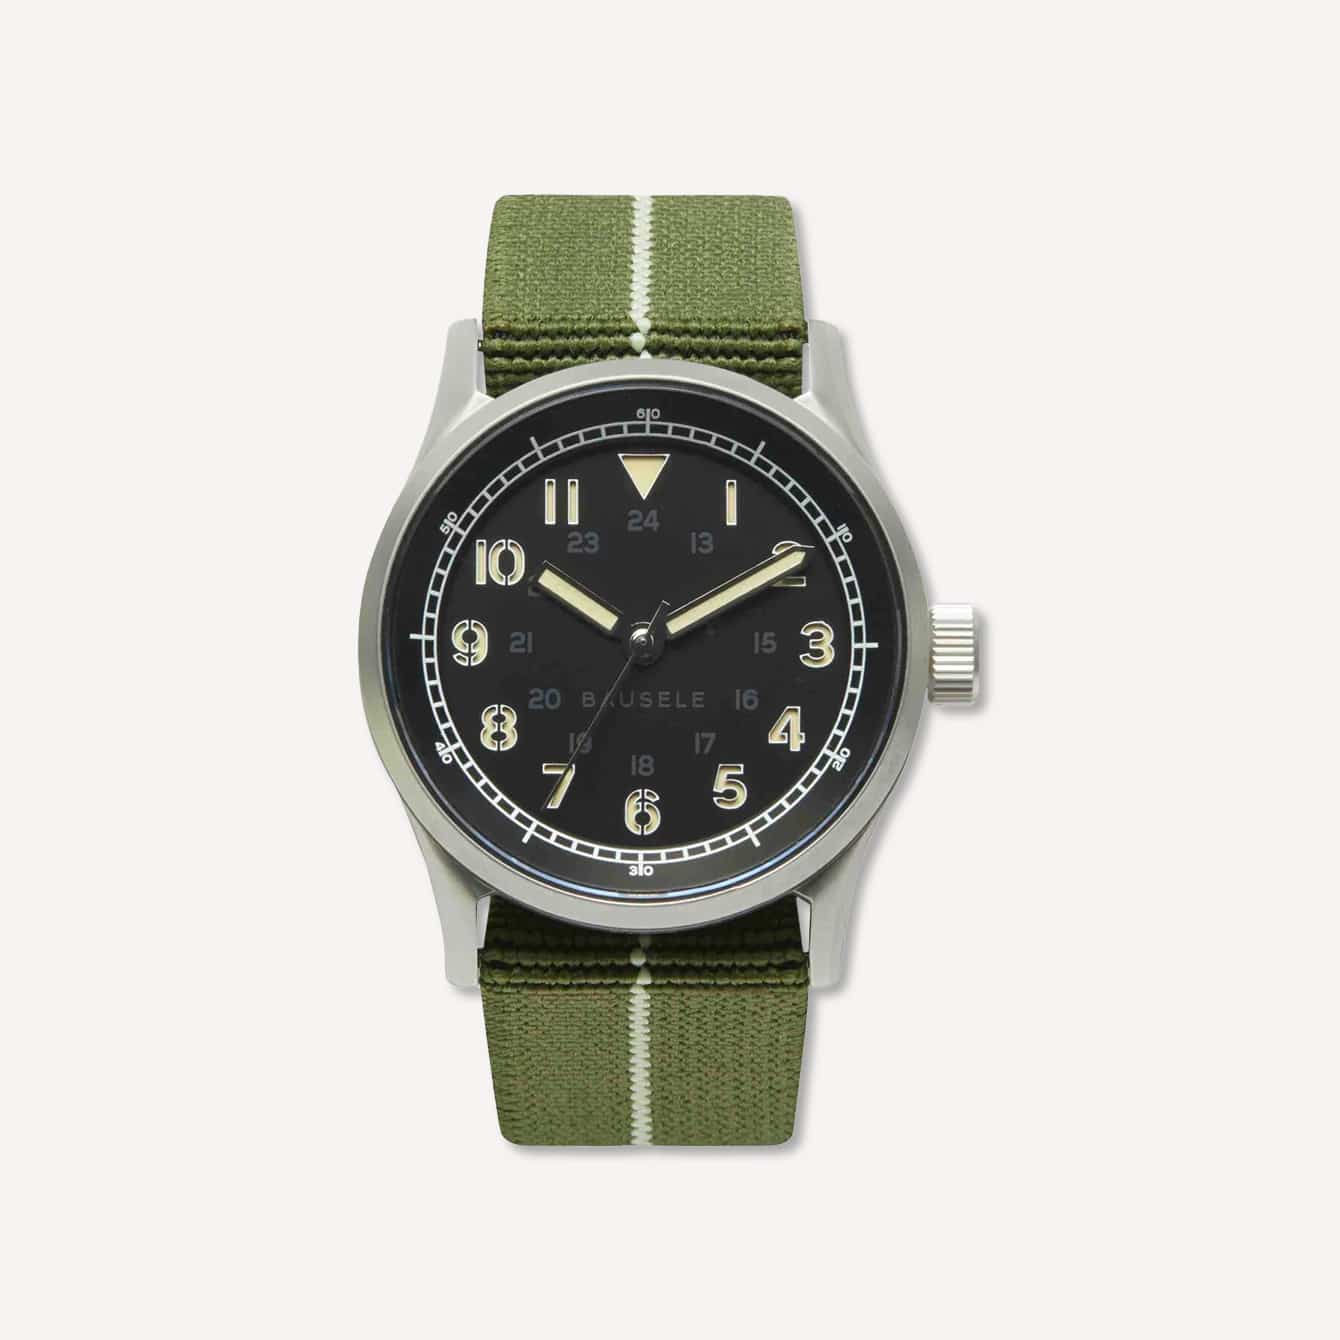 Bausele US Army Reference 31101 Automatic field watch